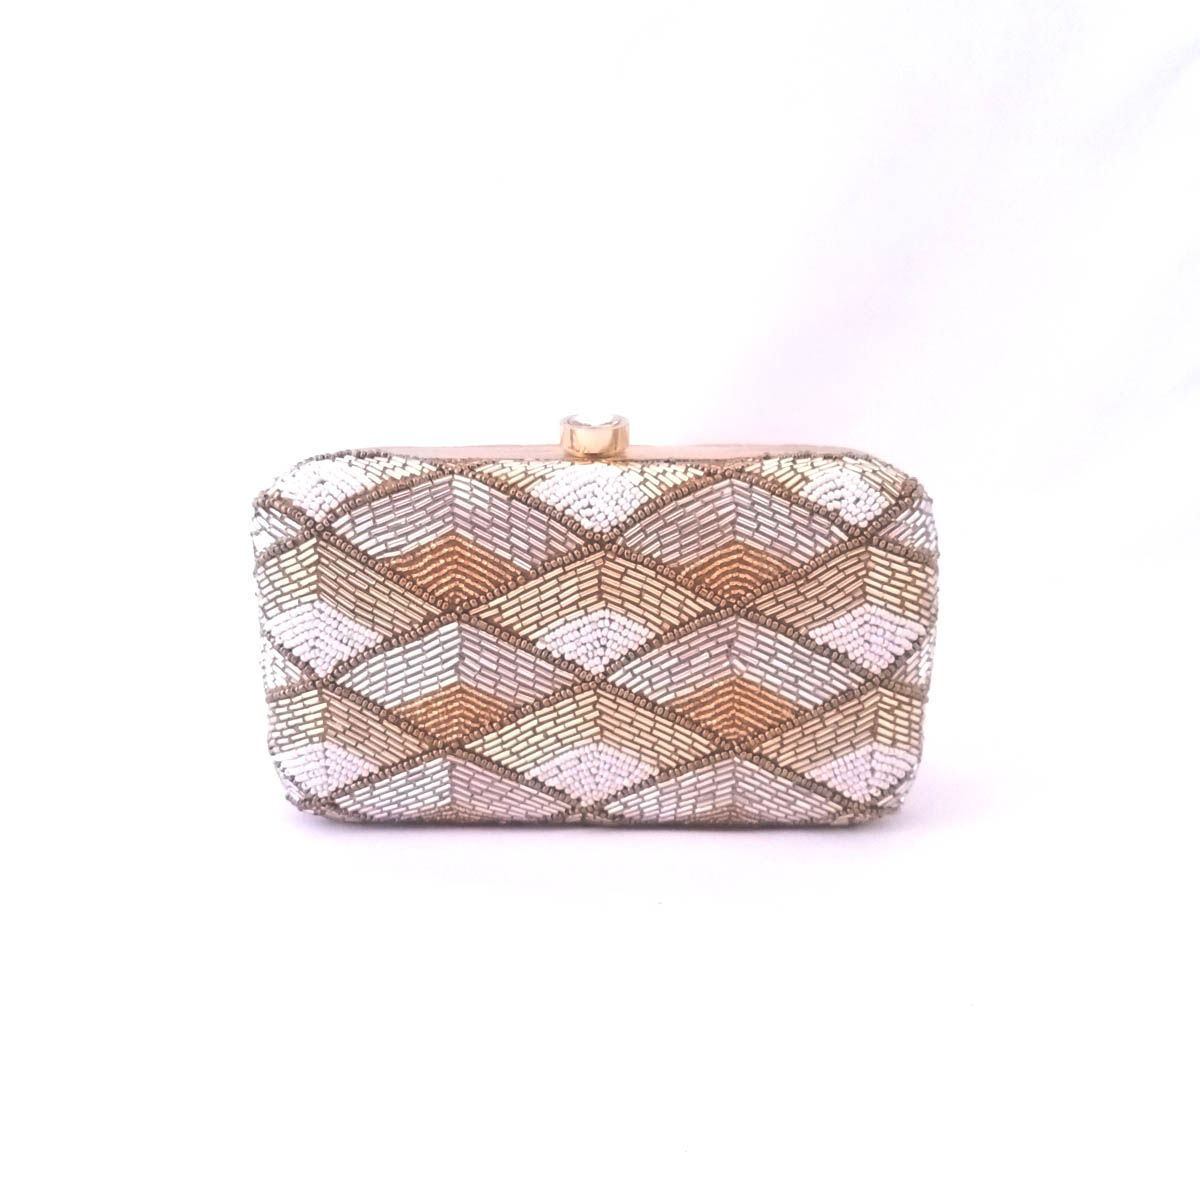 A Clutch Story Tri colored Beaded Handembroidered Clutch